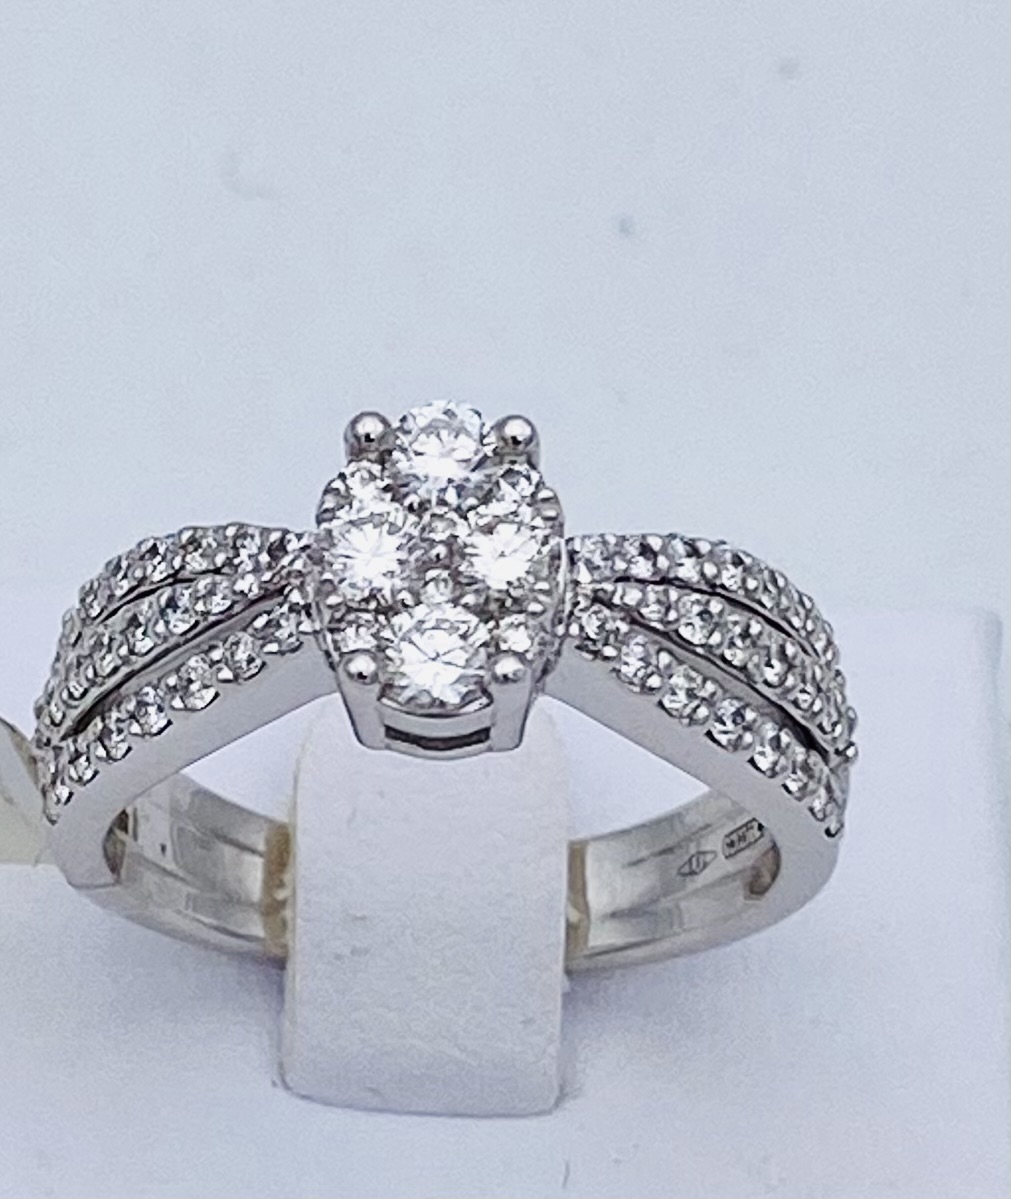 Solitaire diamond ring 750% white gold ART. 467A01DW